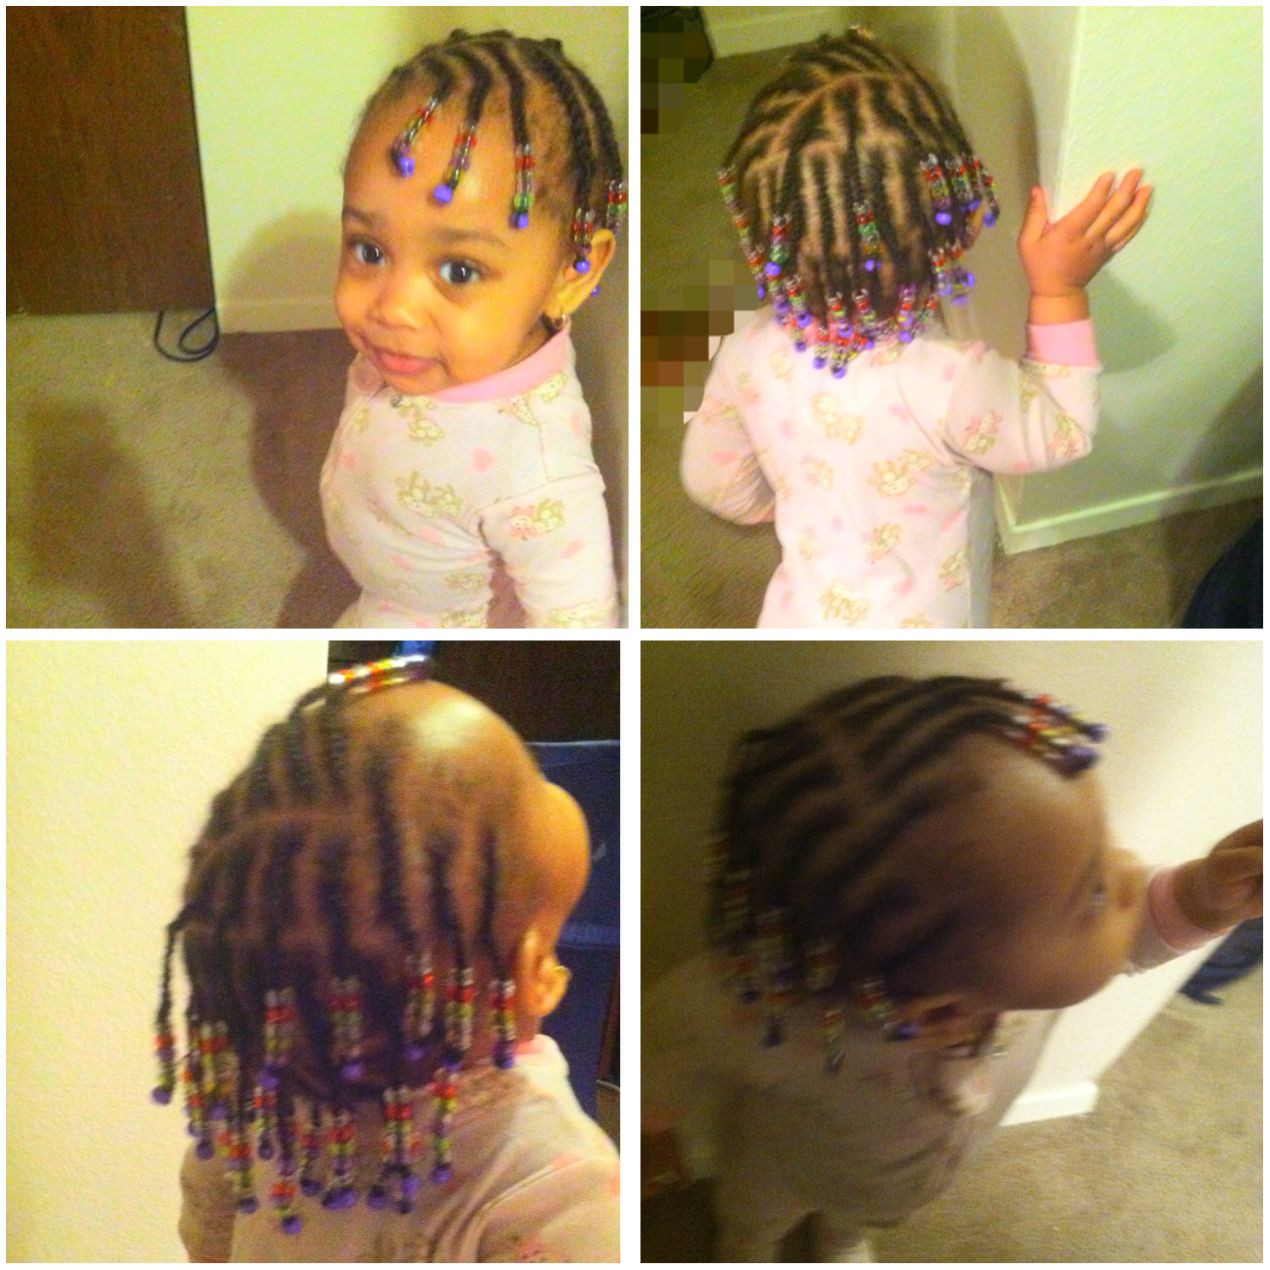 Baby Braids Hairstyle
 Braids with beads Babies kids hairstyle